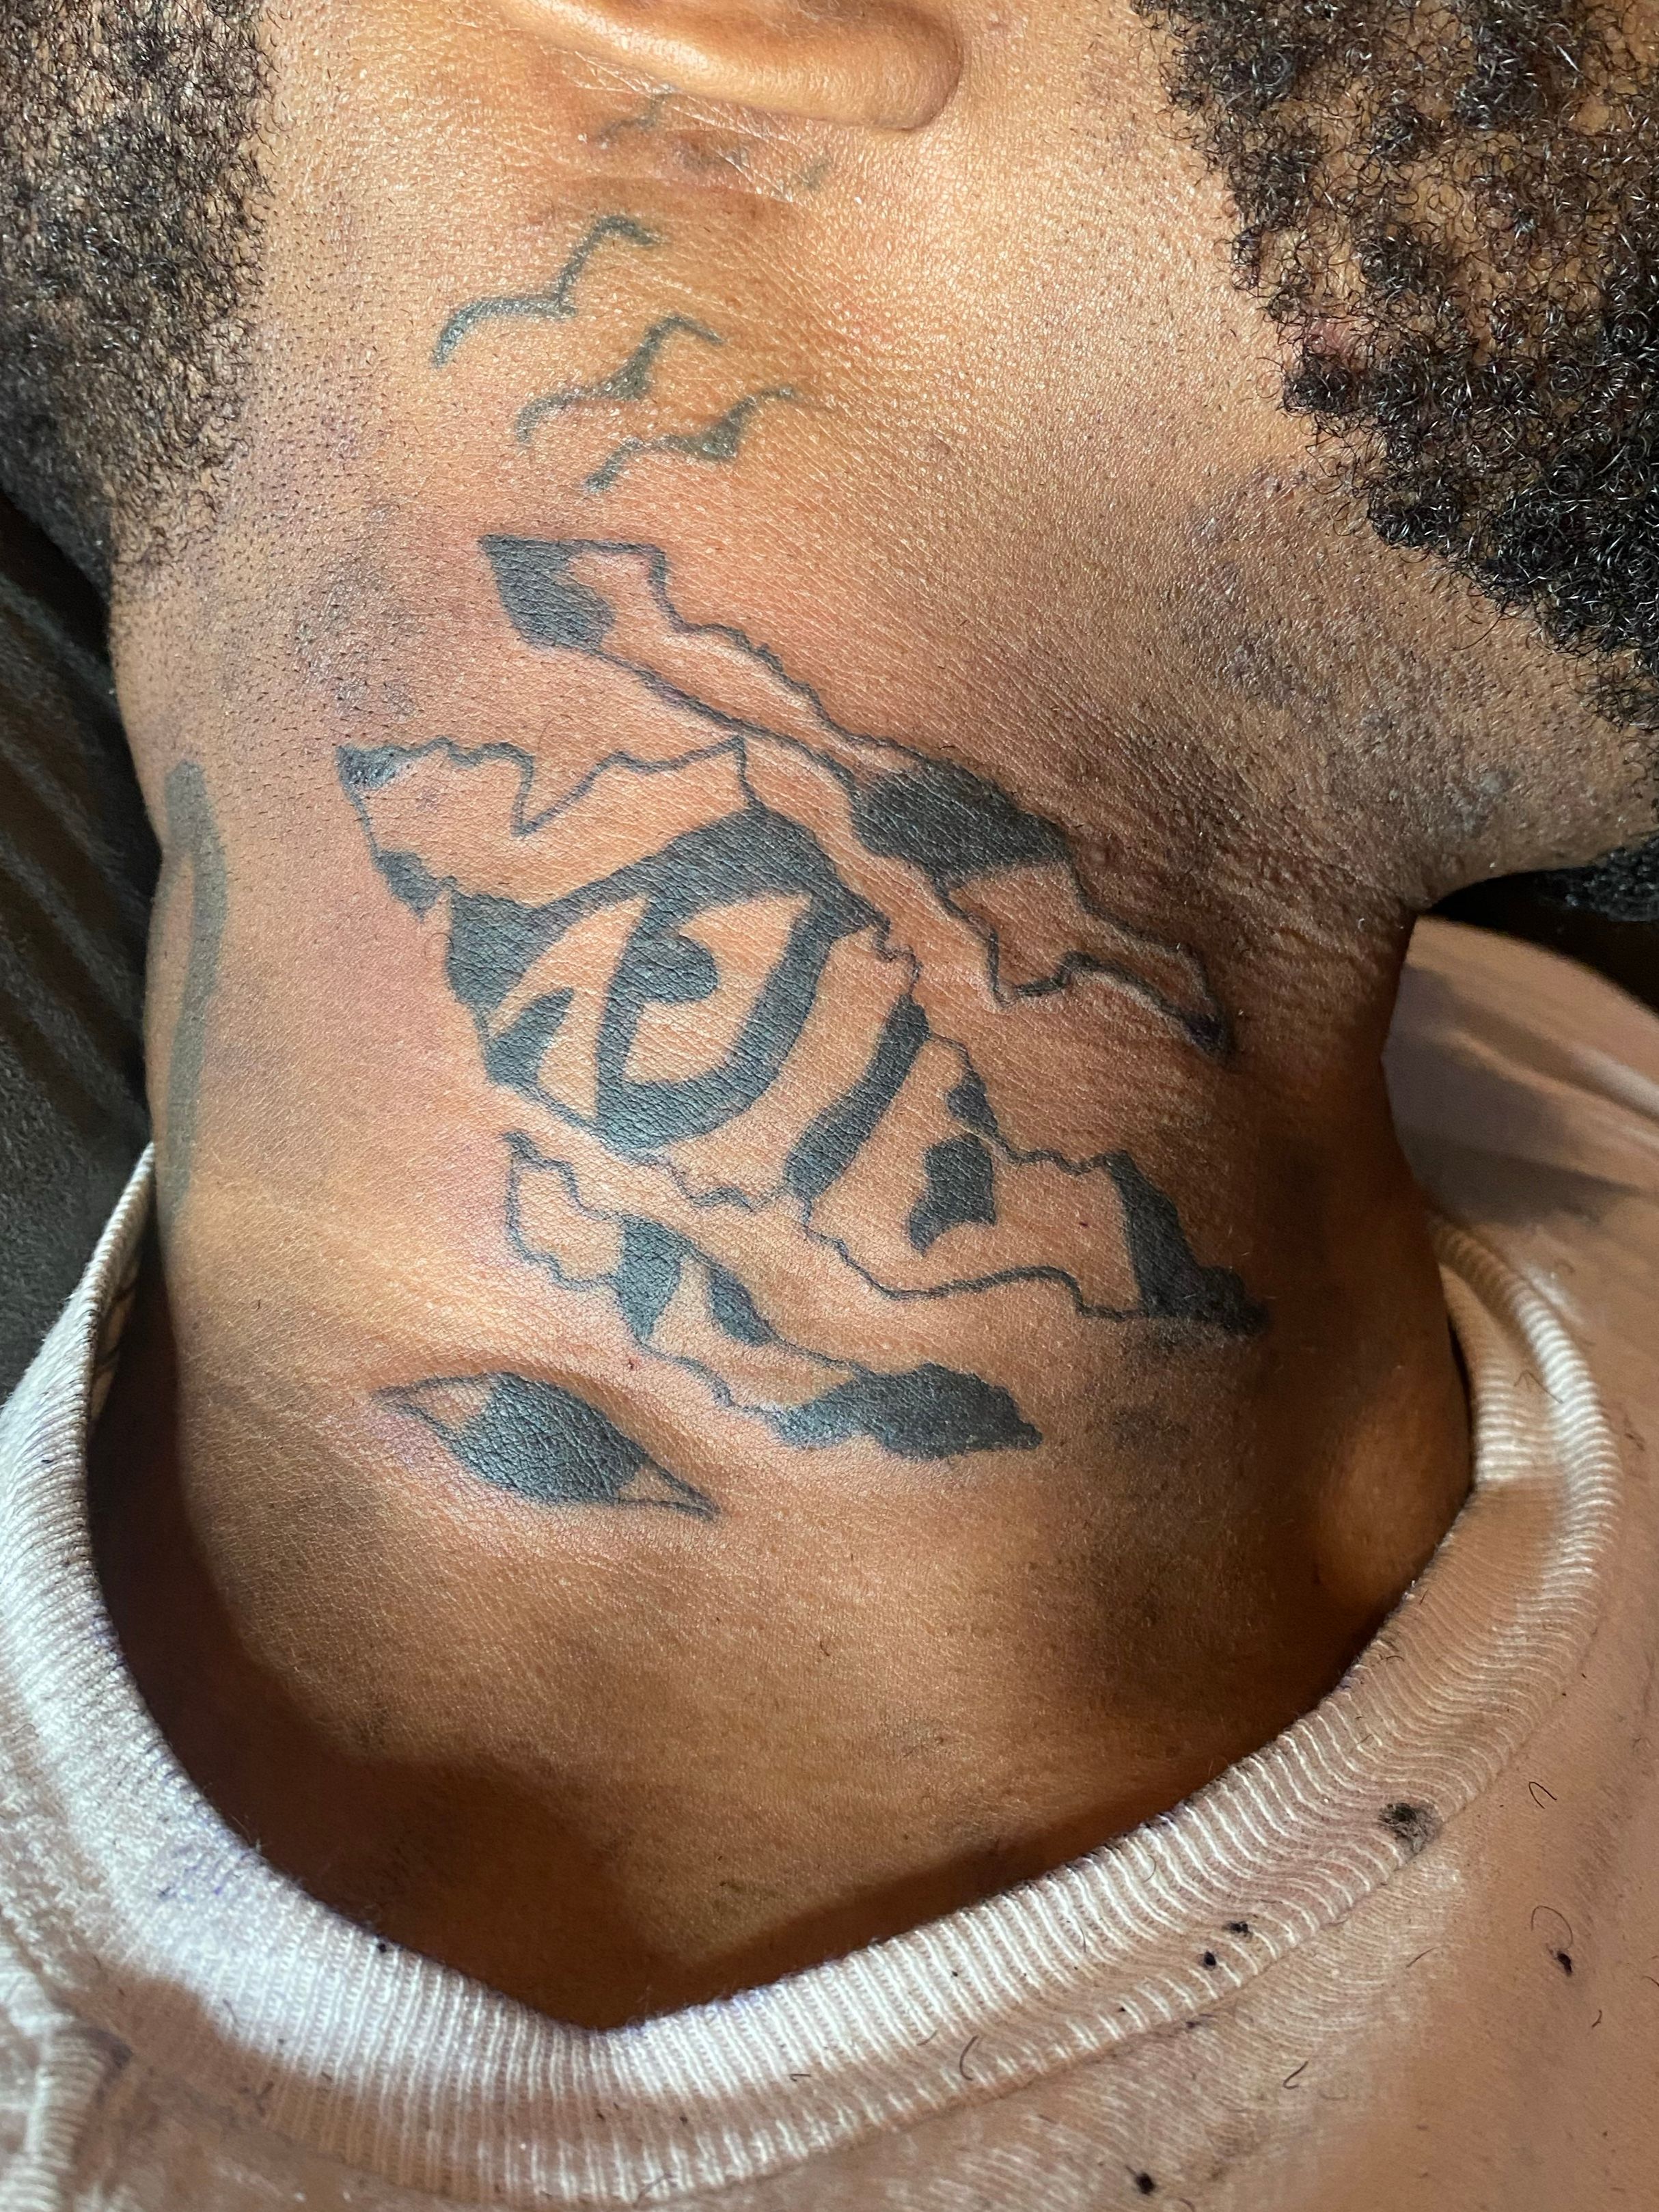 Infamous Tattoos - OTF only the family Tattoo done by Erick #Infamous # Tattoos #infamoustattoos #infamous_tattoos #sanleandro #bayarea #otf #otf💯  #otftattoo #tatuaje #tatuajes #bayareatattooartist #bayareatattooshop |  Facebook